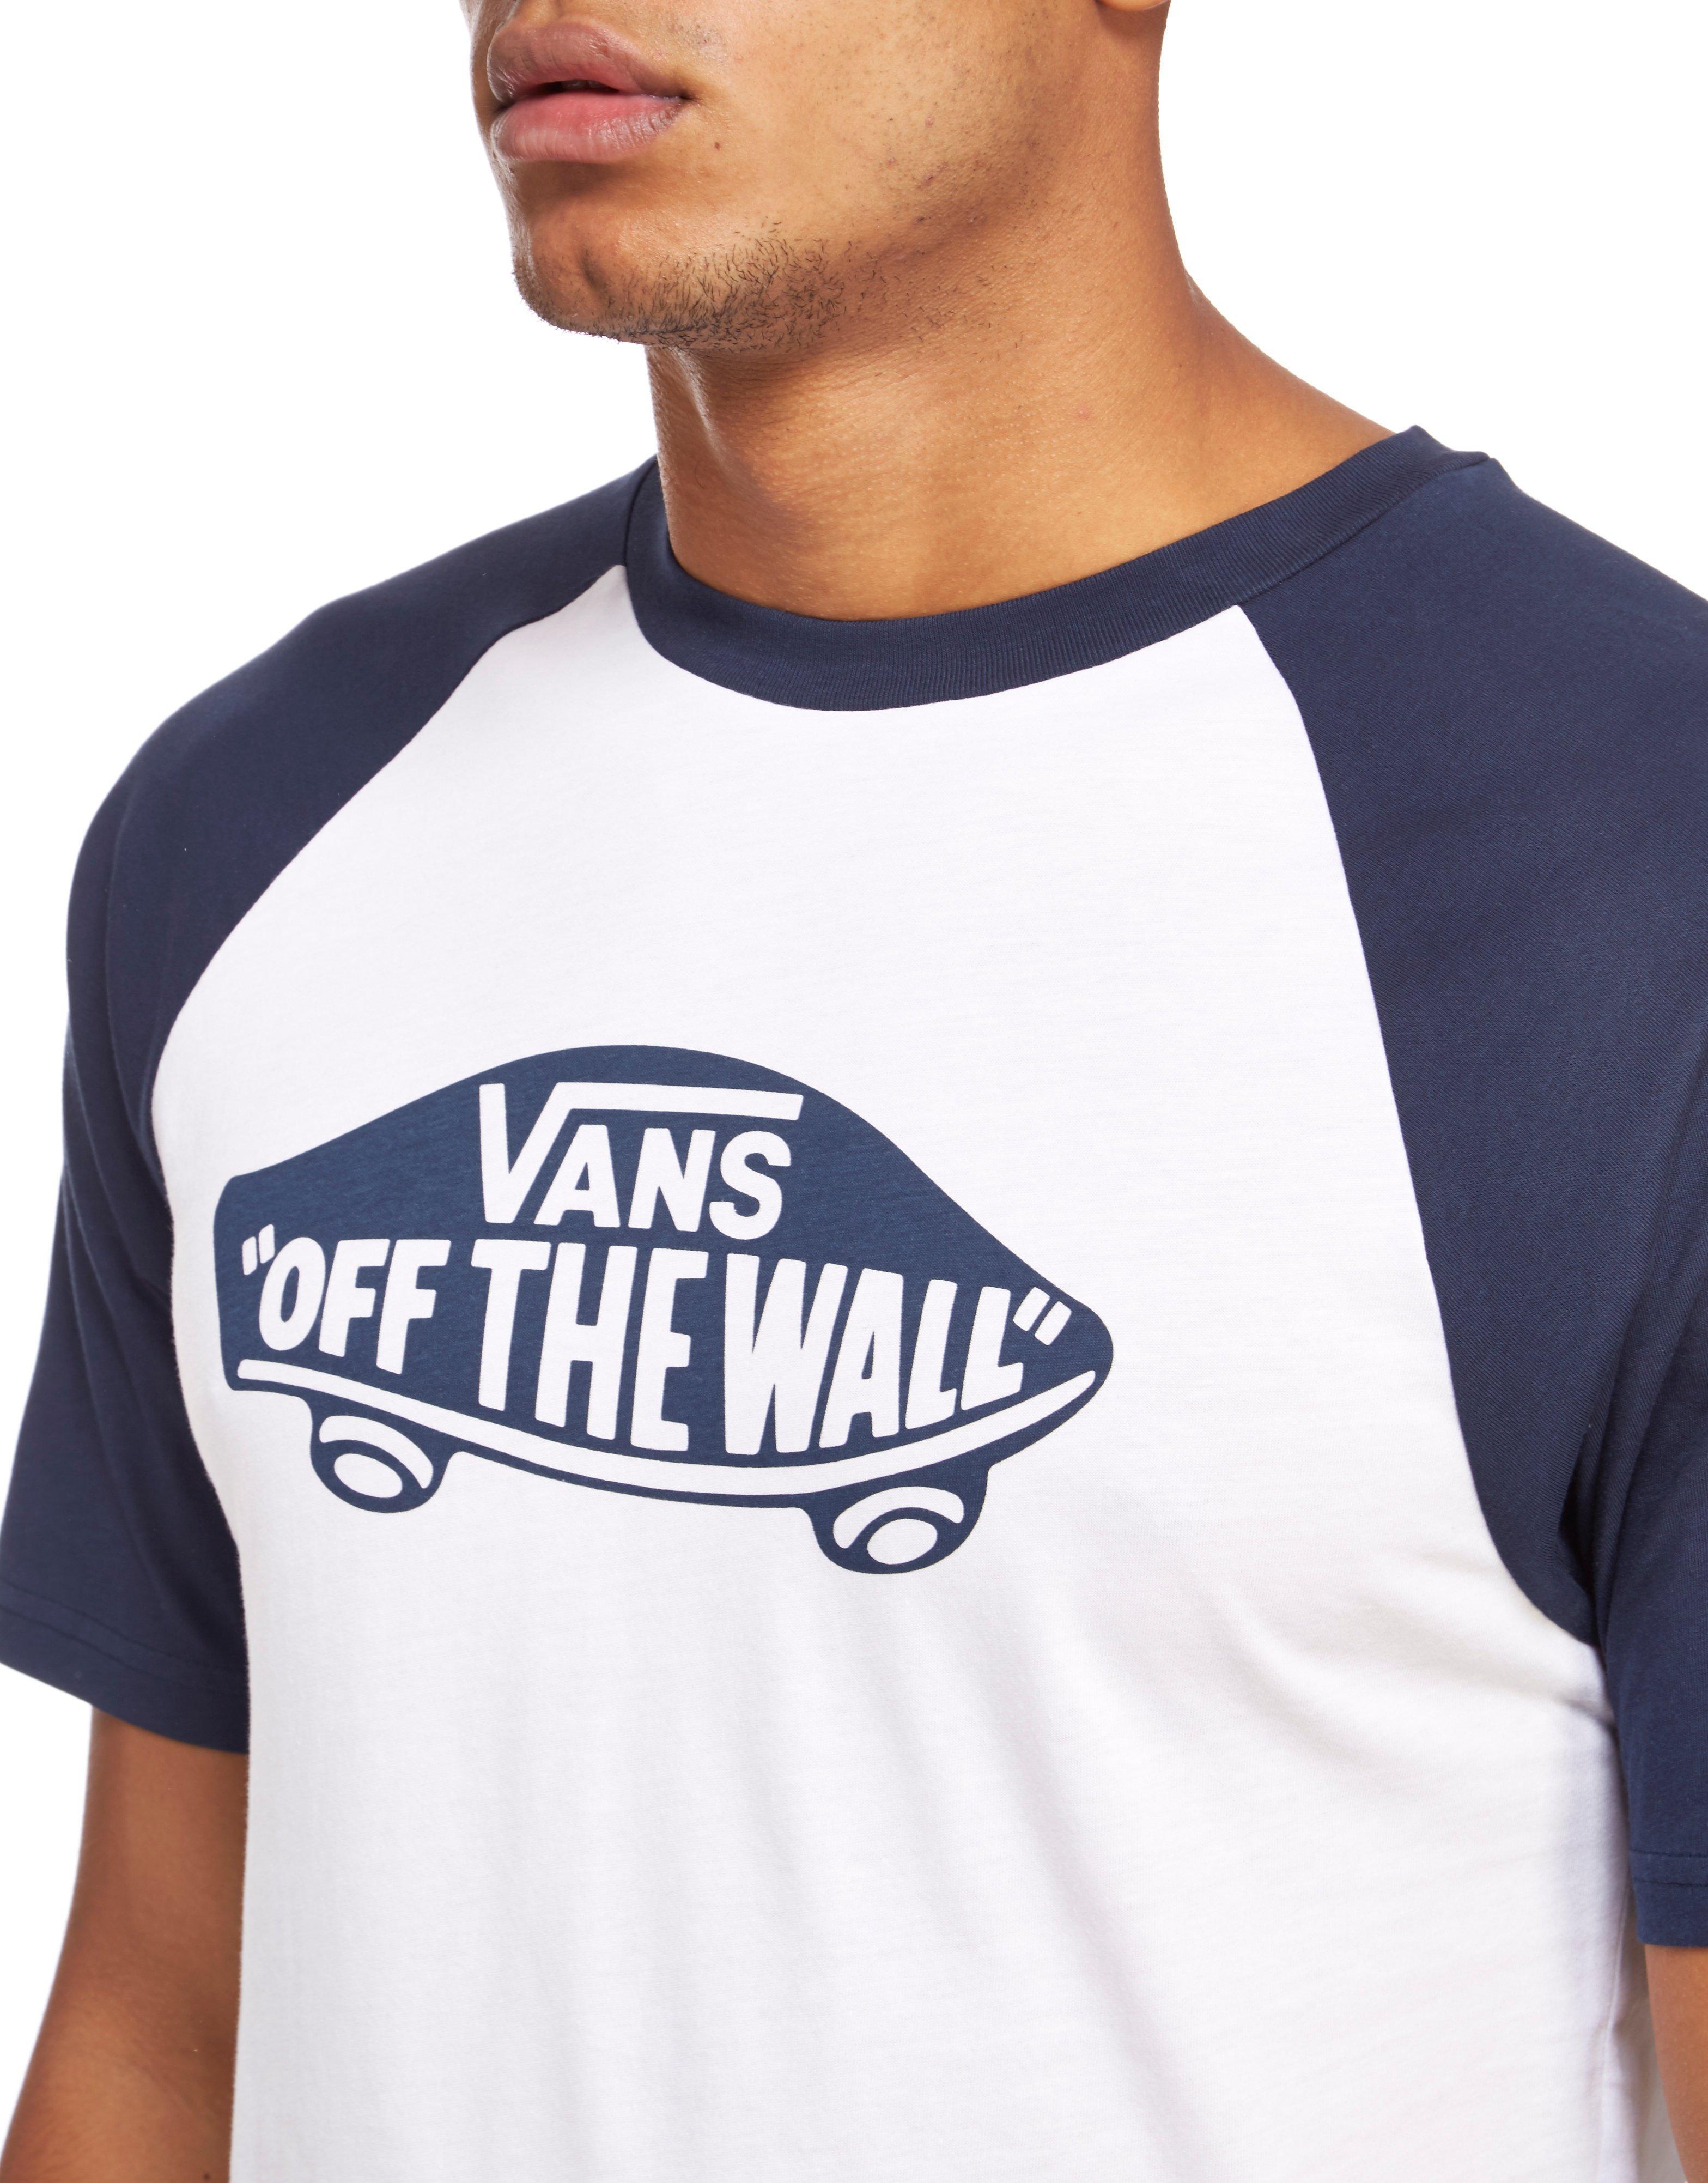 Subscription boxes vans off the wall raglan t shirt bandeau, Champion heritage all over print white t shirt, wedding party dress for baby girl. 